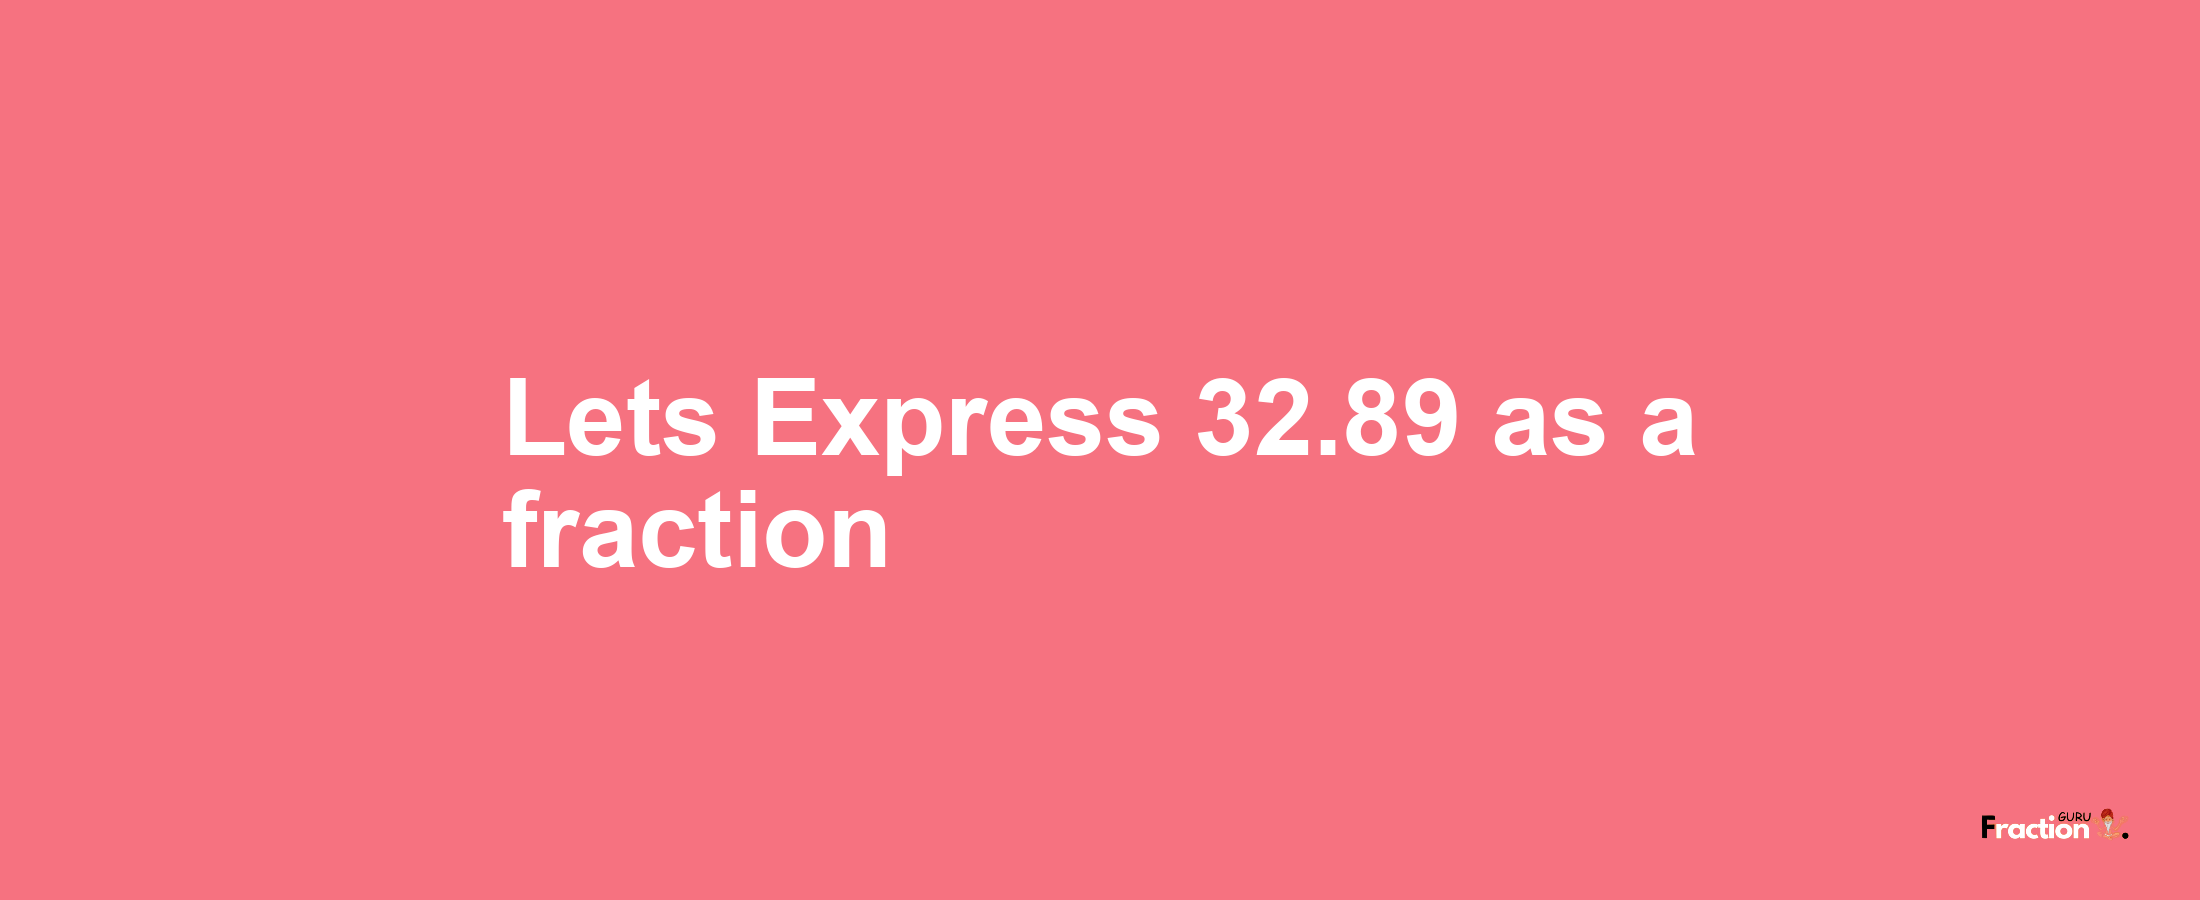 Lets Express 32.89 as afraction